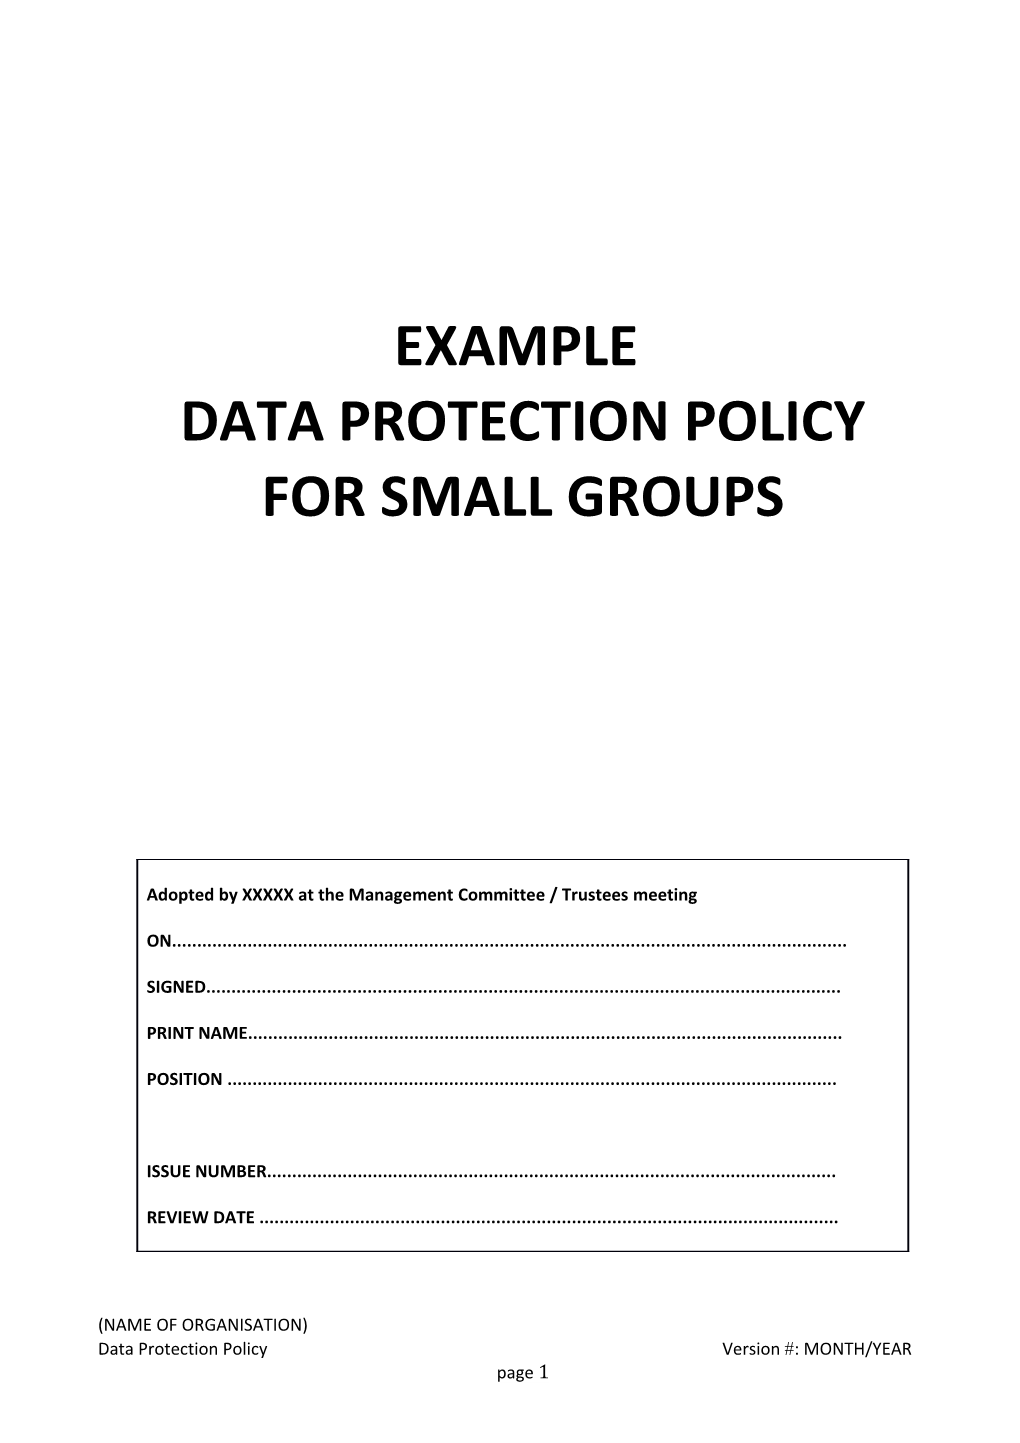 Data Protection Policy for Small Groups